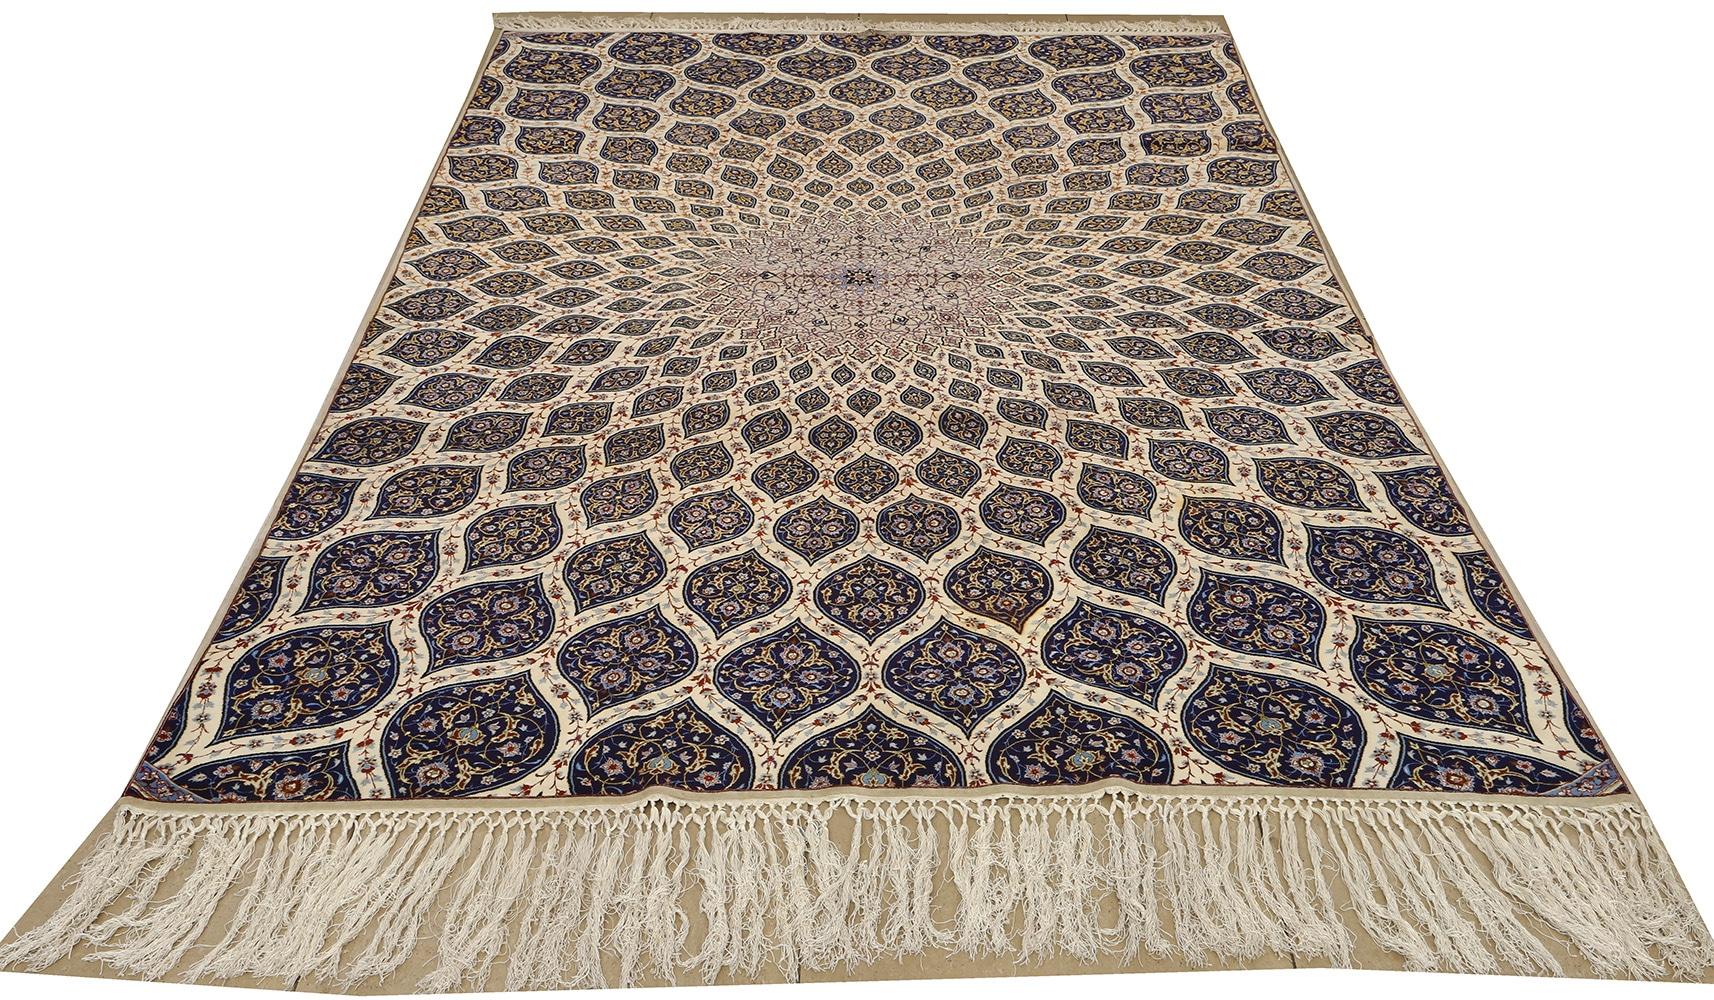 Wool Nazmiyal Collection Vintage Isfahan Persian Rug. Size: 6 ft 8 in x 8 ft 8 in